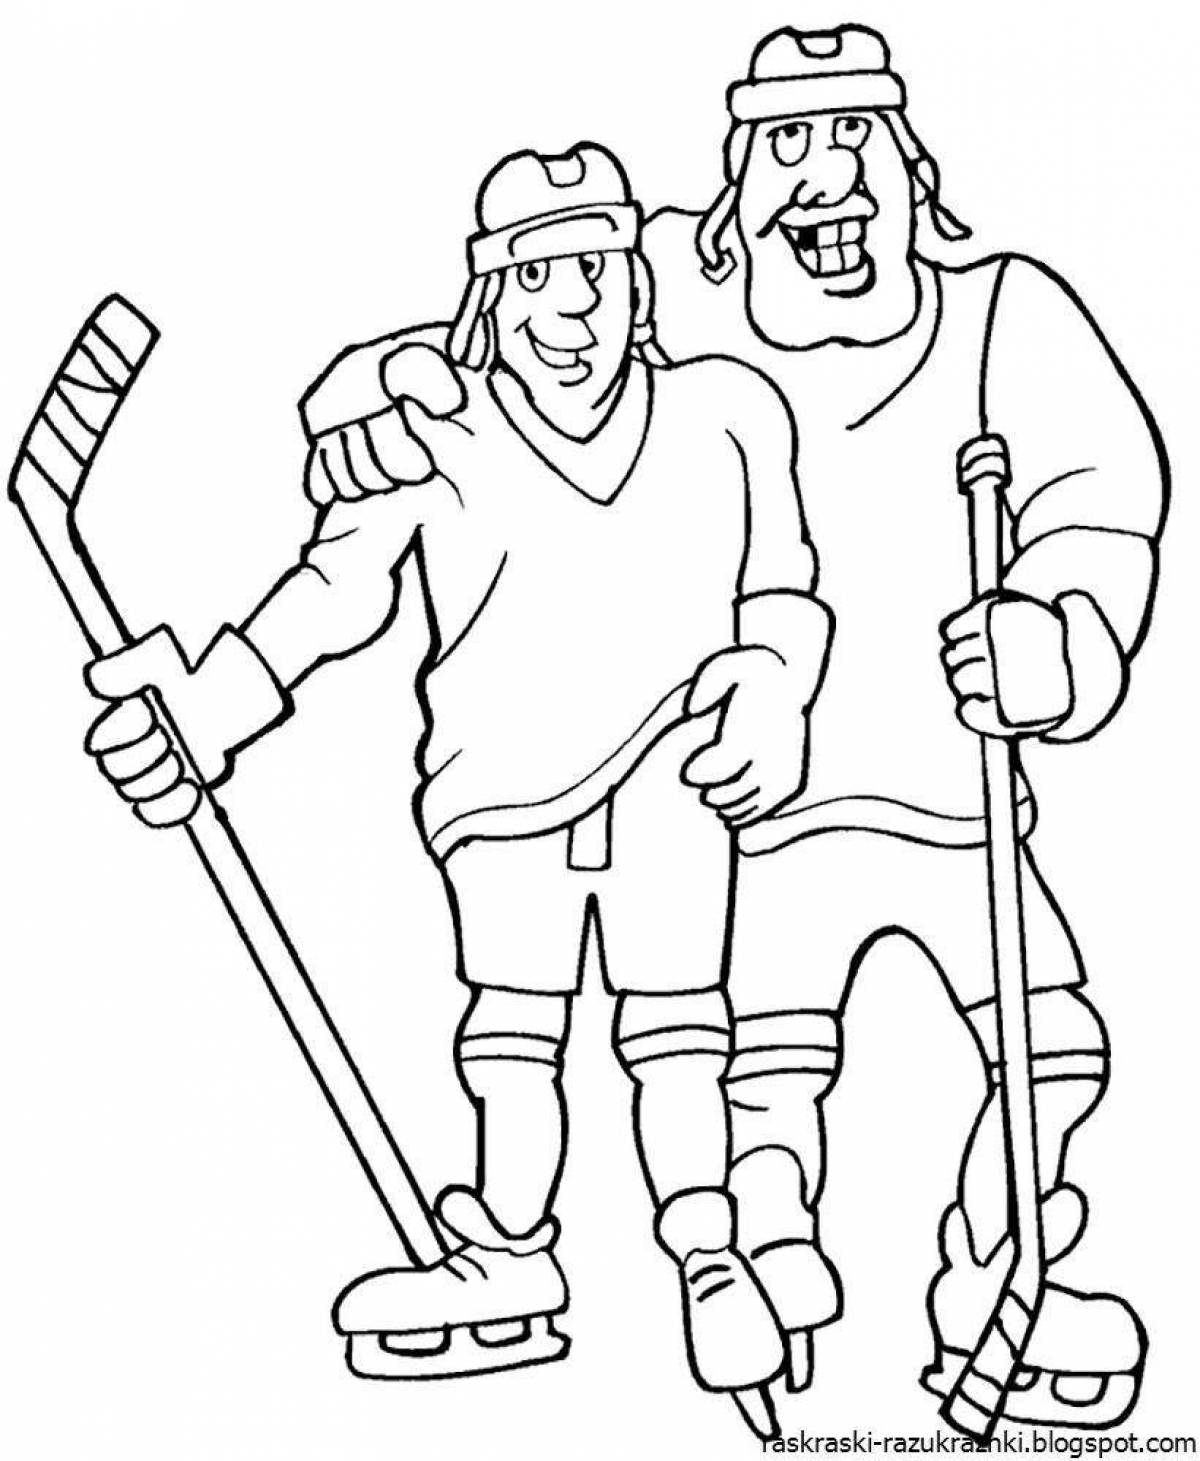 Creative hockey coloring book for kids